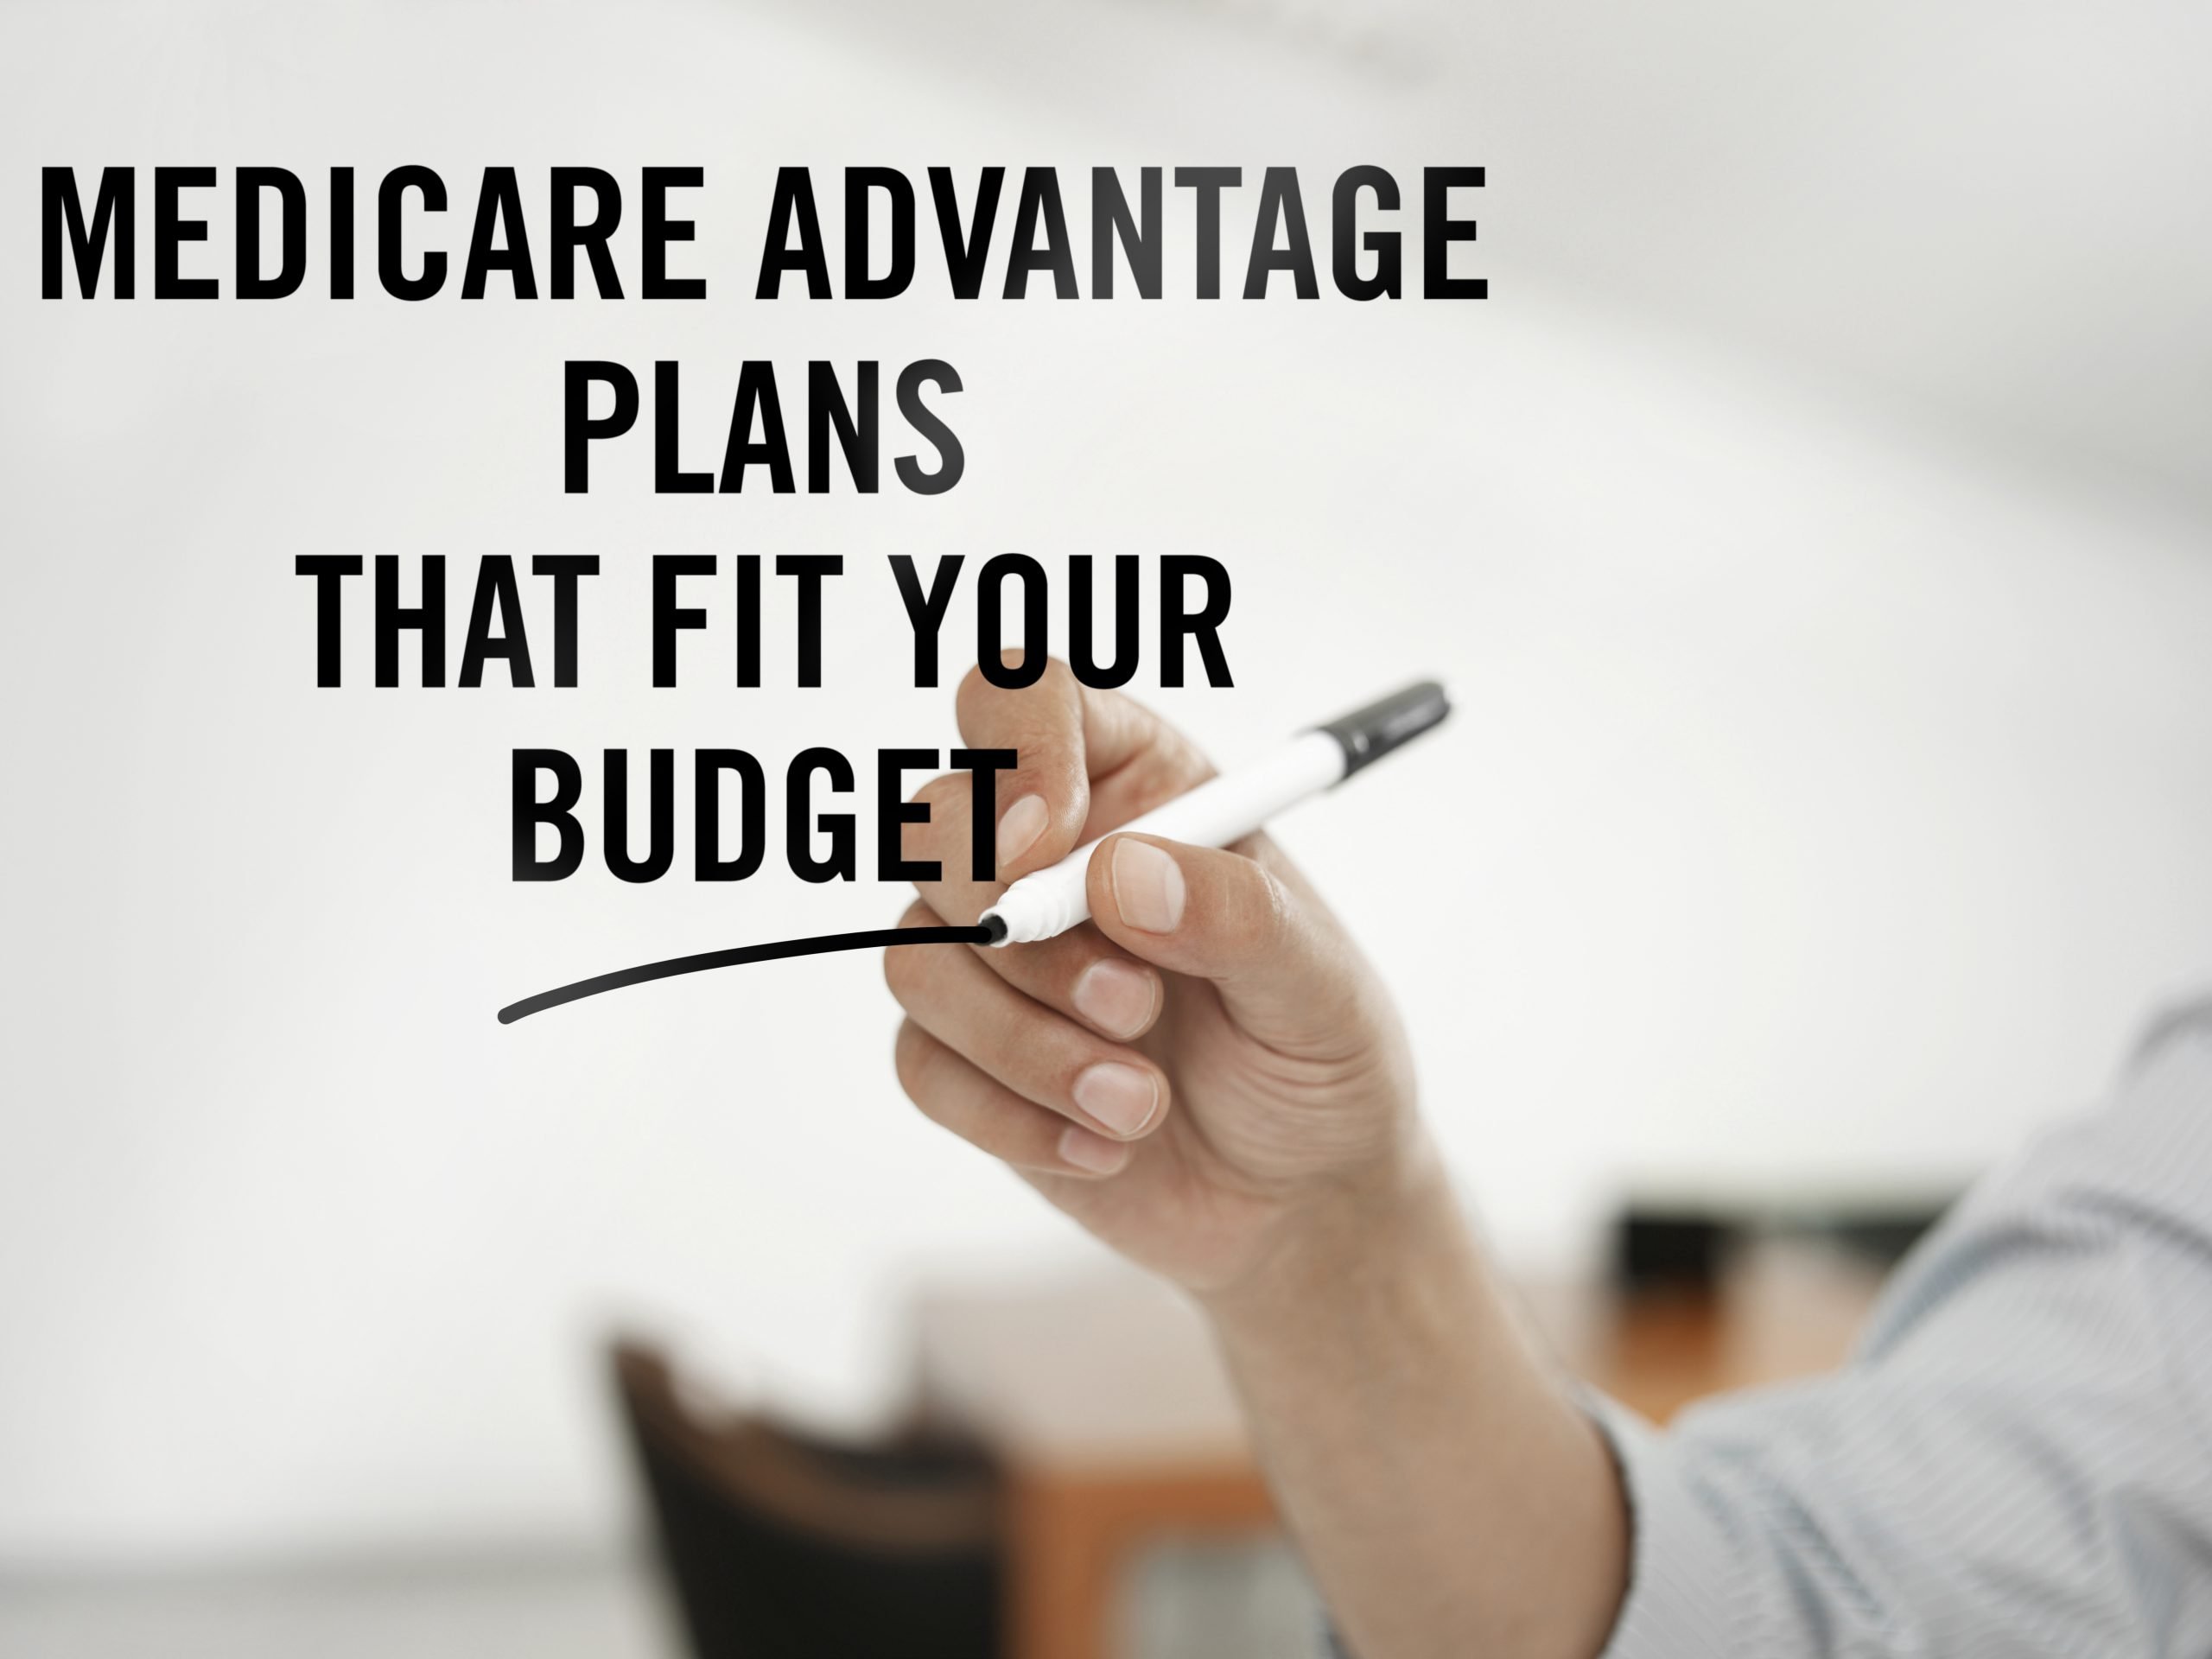 Medicare Advantage Plans Are Free For Most